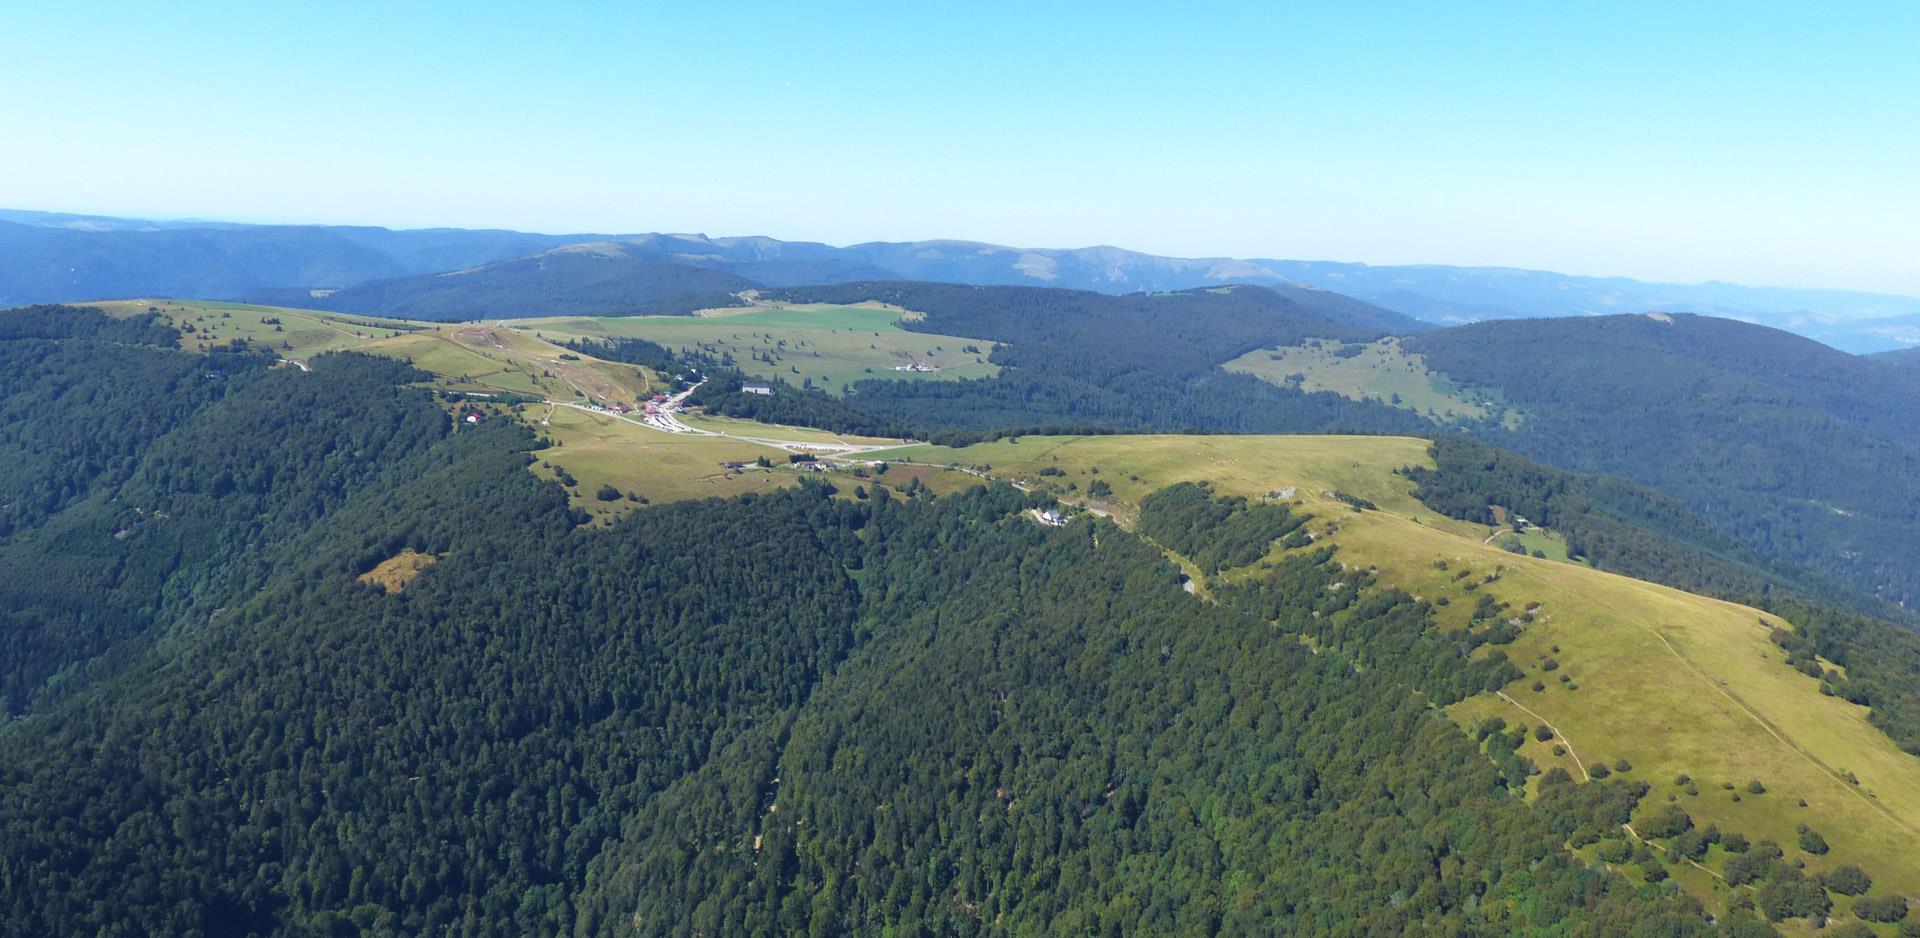 Bird’s eye view of the Ballon d'Alsace, located nearby the campsite Les Castors in the Haut-Rhin